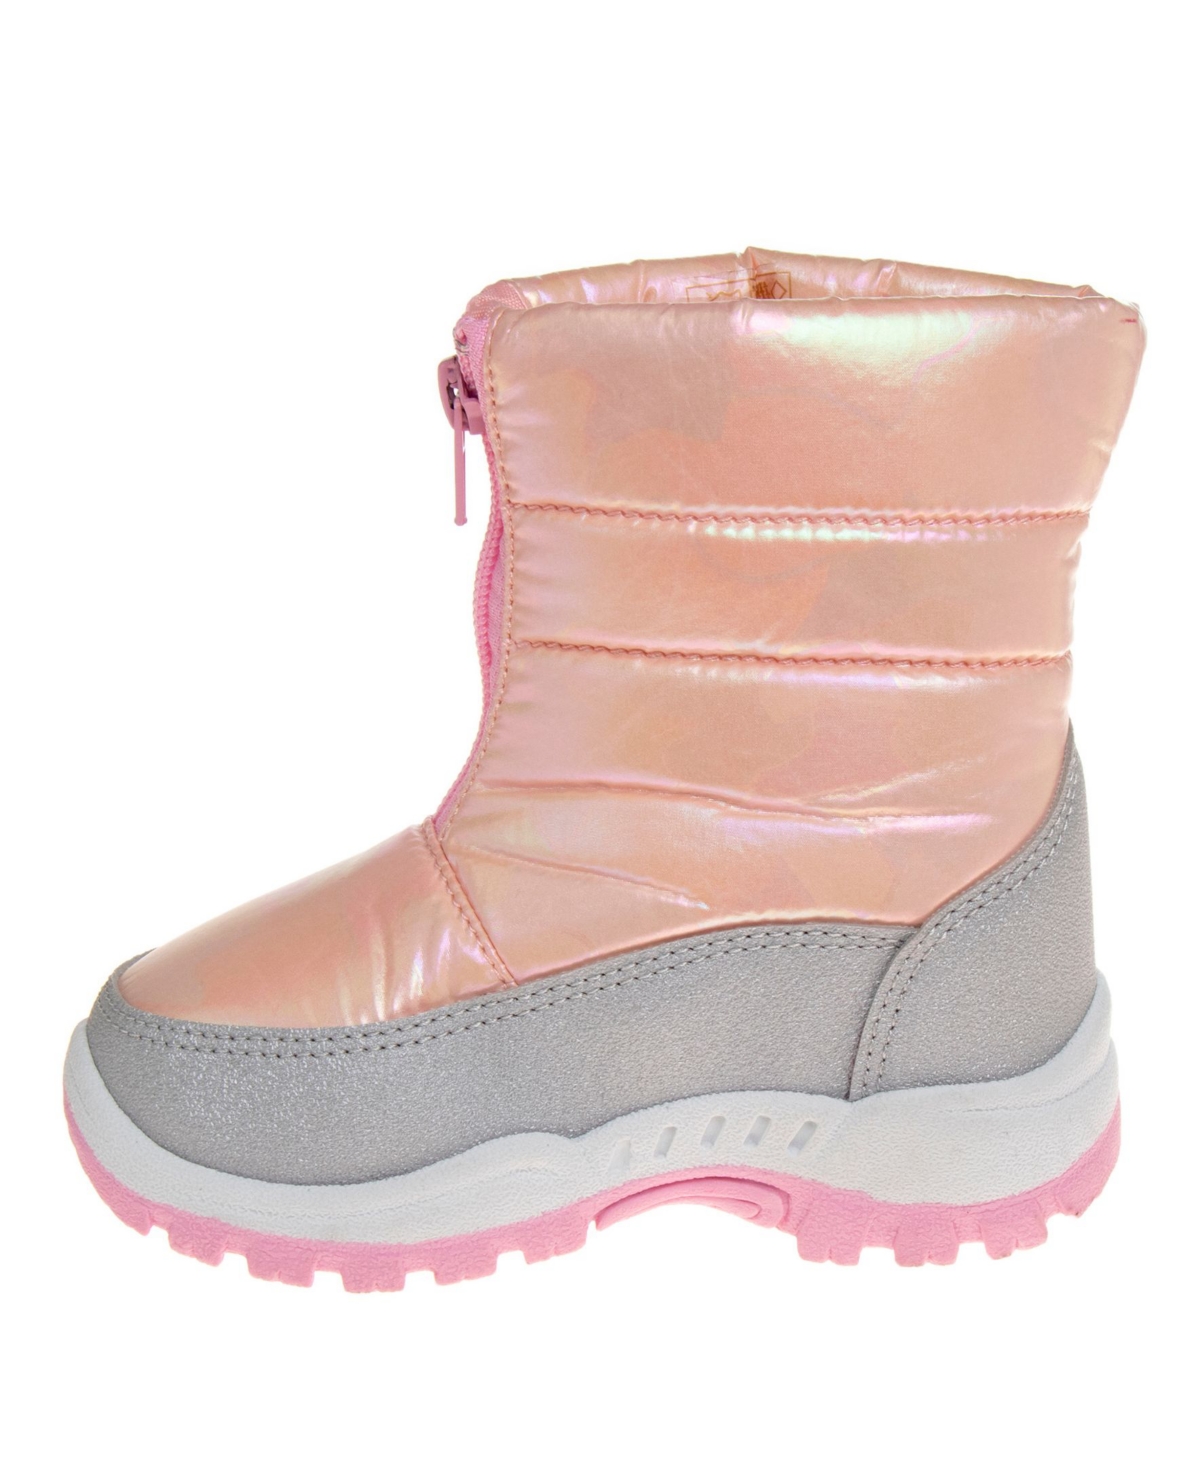 Shop Avalanche Little And Big Girls Slip-resistant Waterproof Snow Boots In Pink,silver